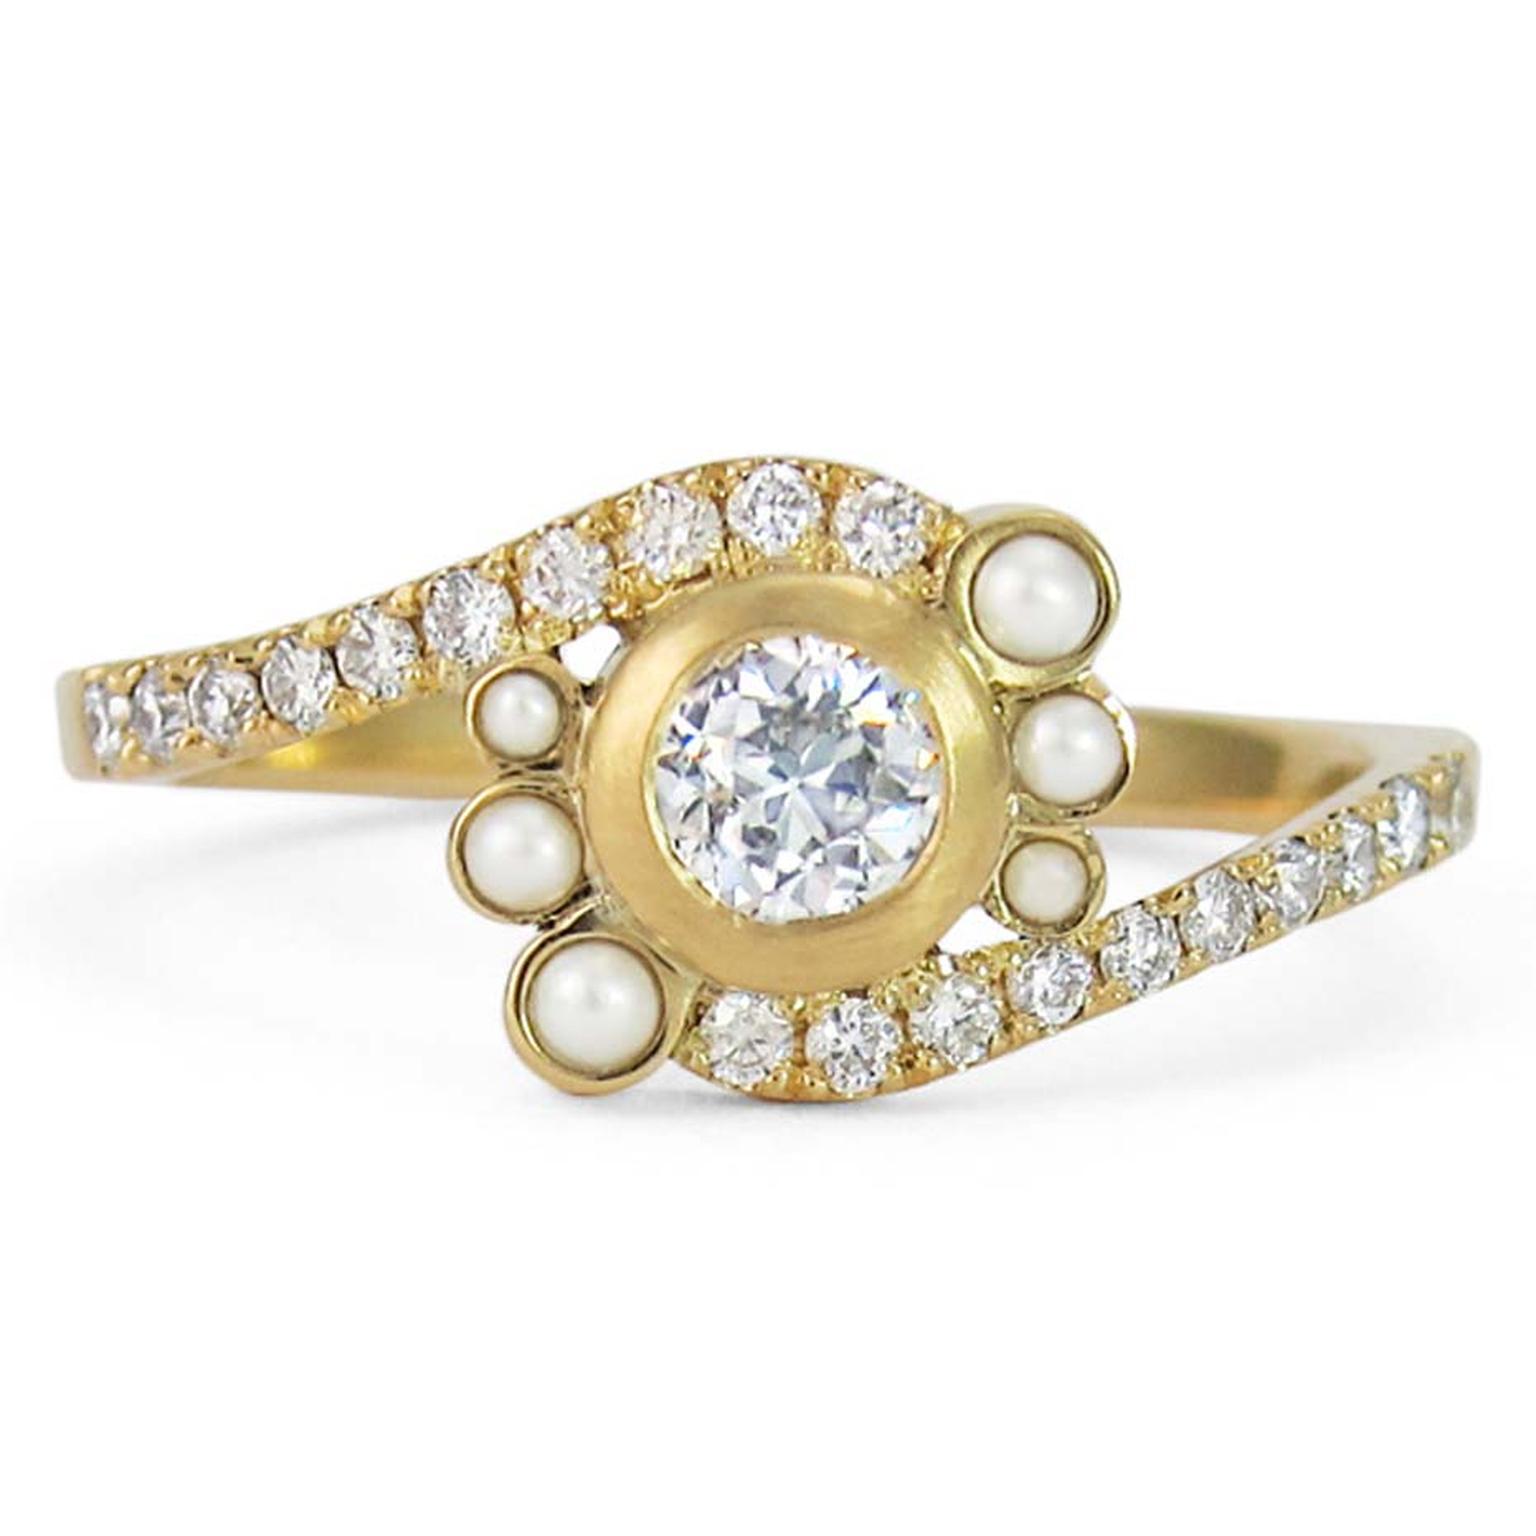 Jessica Poole engagement ring featuring a centre brilliant-cut diamond encircled by 6 pearls and a pavé diamond band.